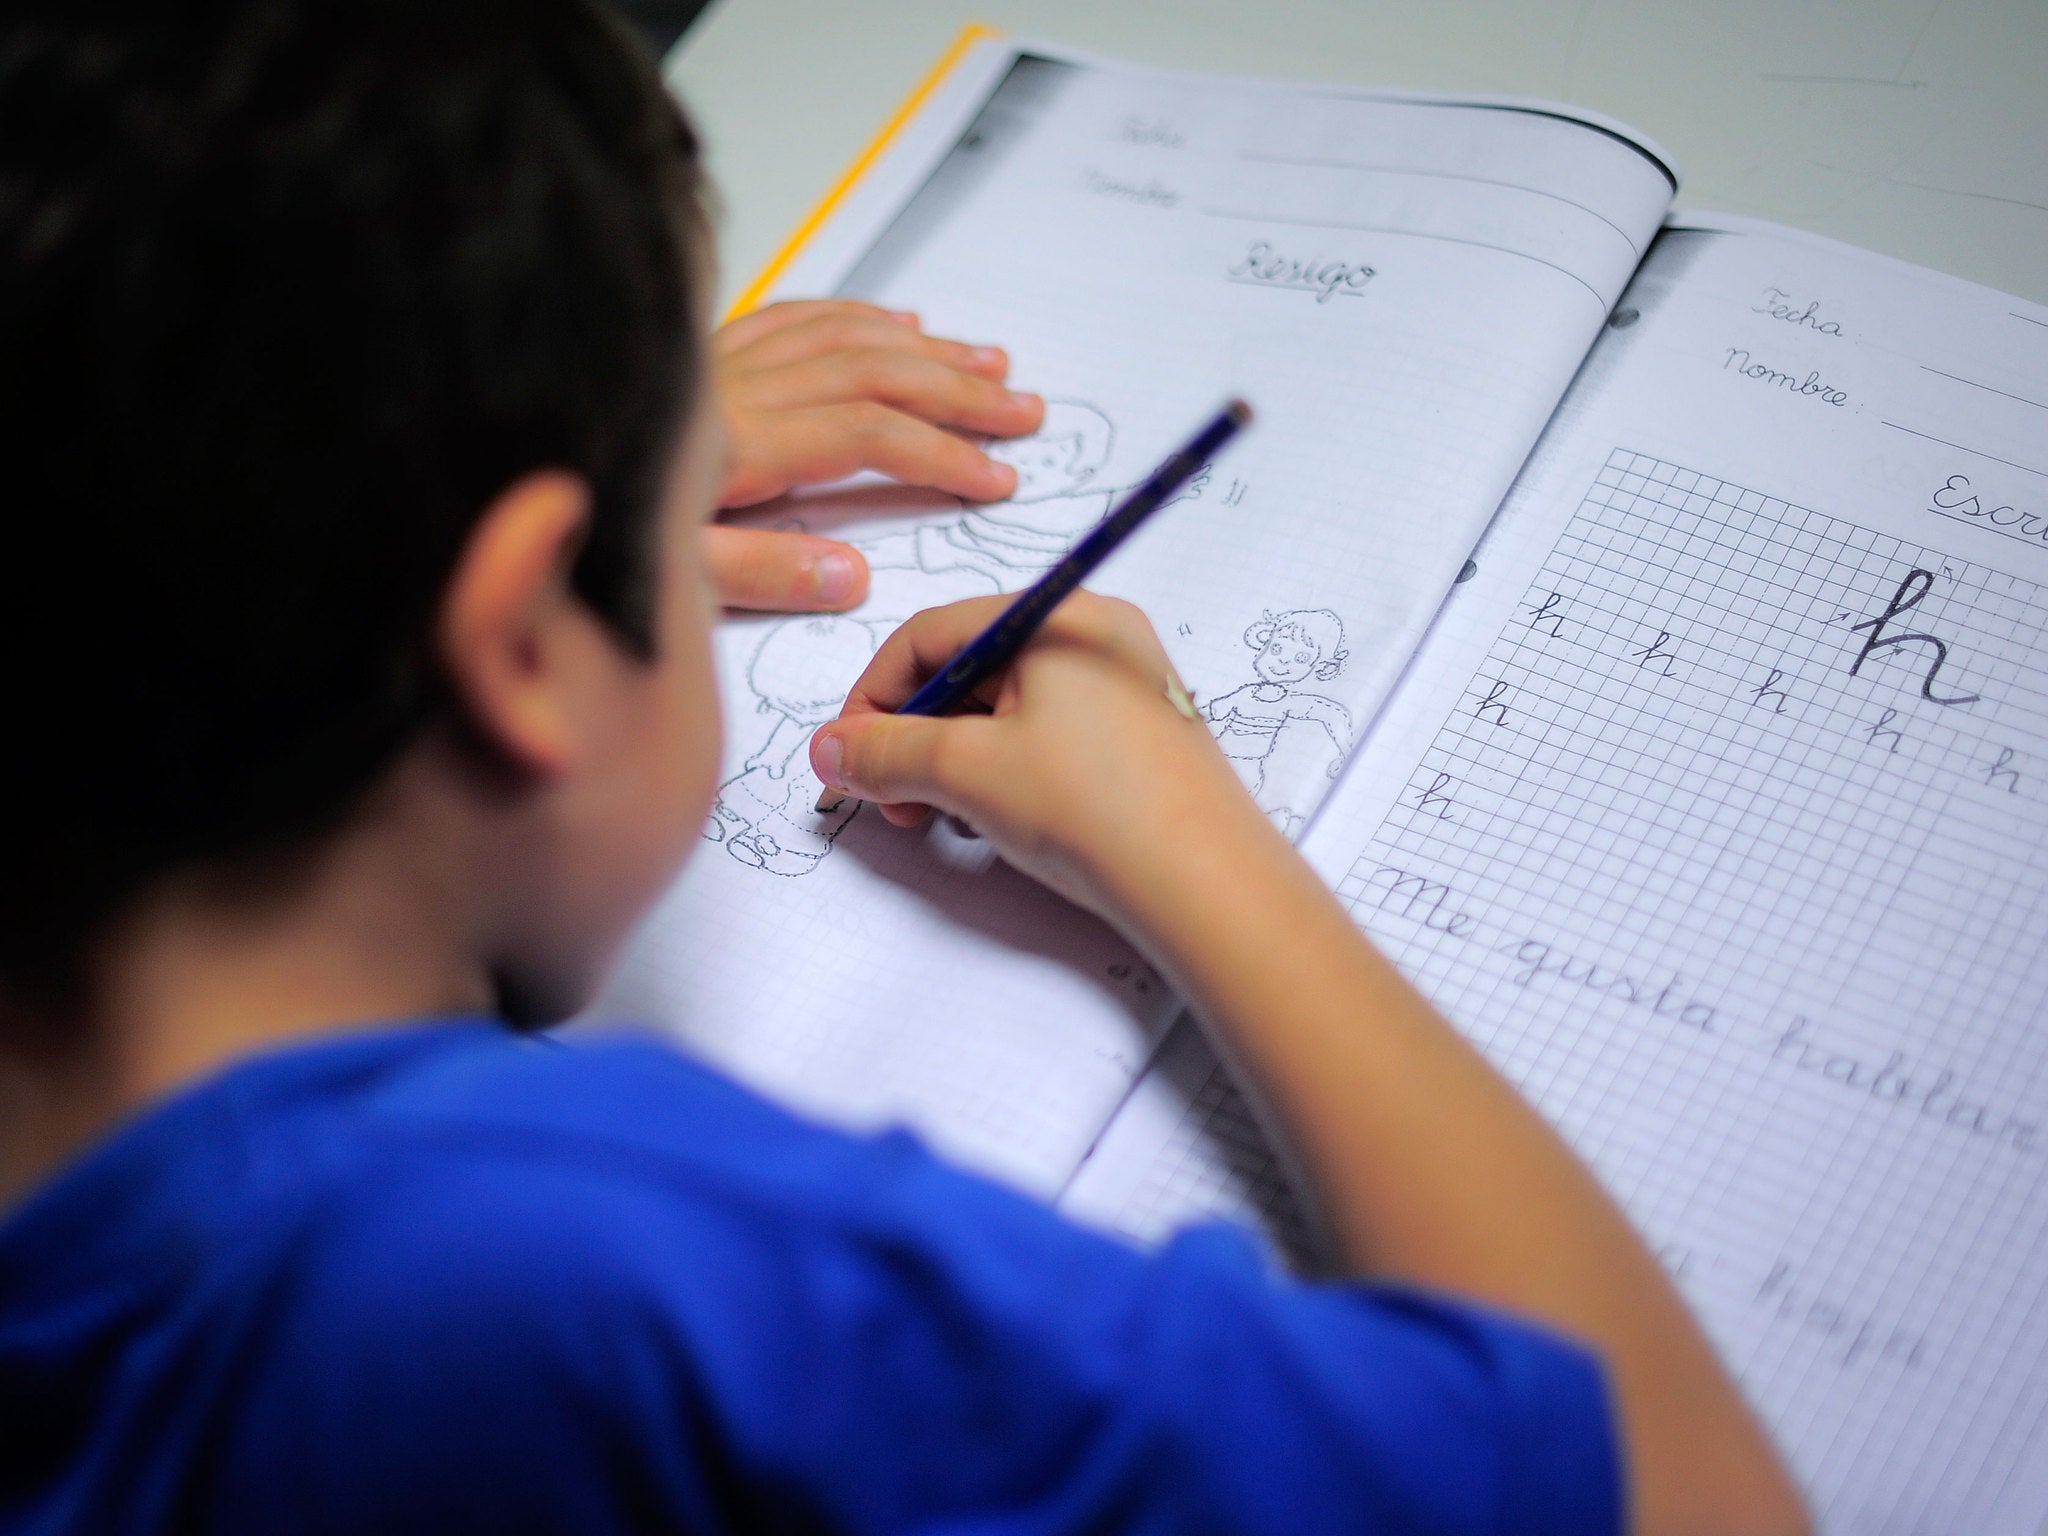 A young boy from a financially troubled family does his homework at the care centre Marti-Codolar in Barcelona on November 21, 2012 where he spends his afternoons with other children. Children from many families brought close to poverty by Spain's economic crisis benefit from free care services such as this free evening learning centre.